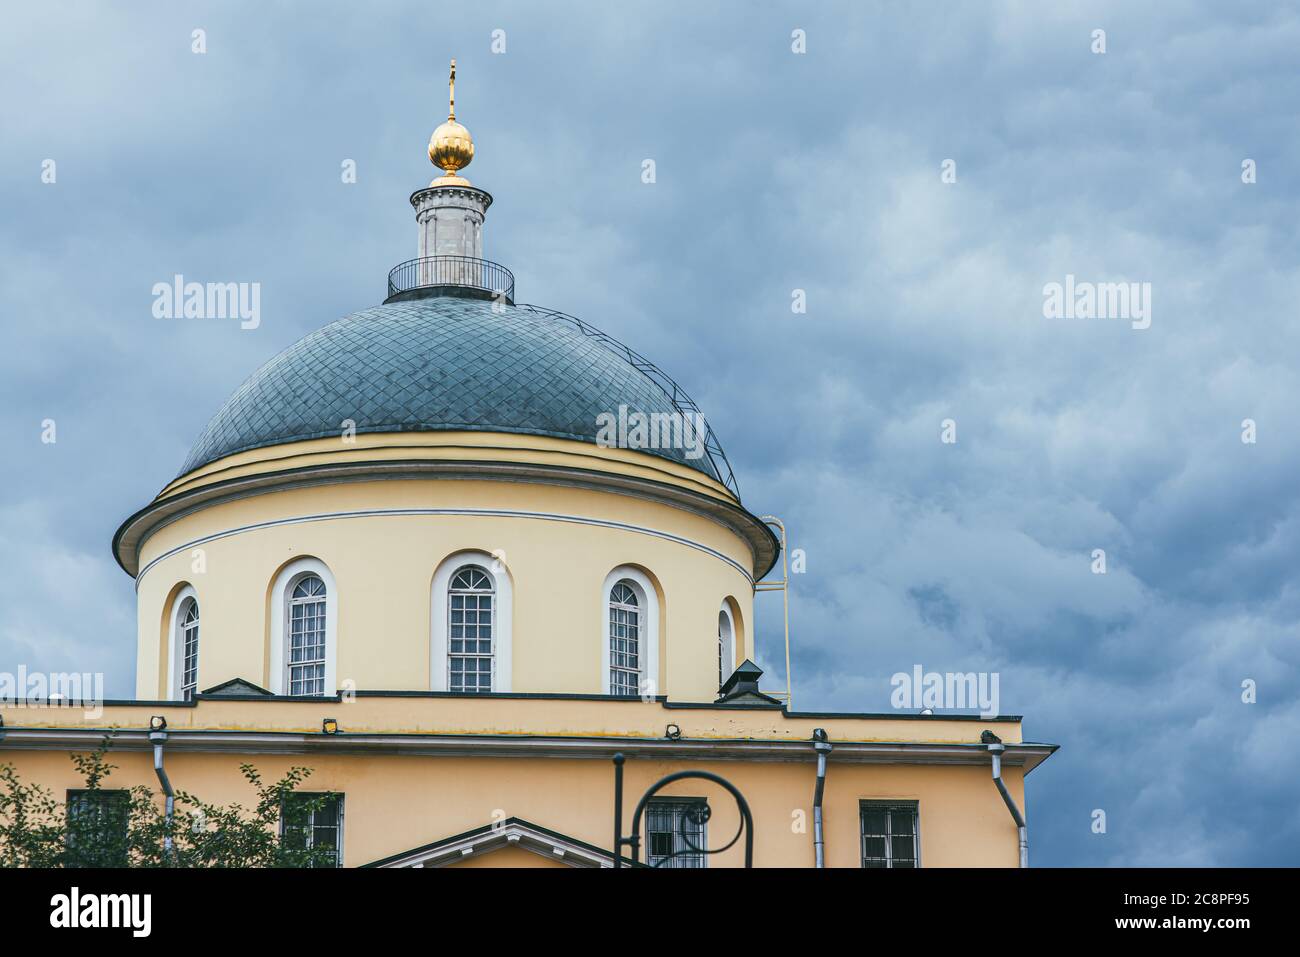 A green dome with elongated arched windows topped with a golden dome against a stormy sky. Capital of the Russian Empire Moscow Stock Photo